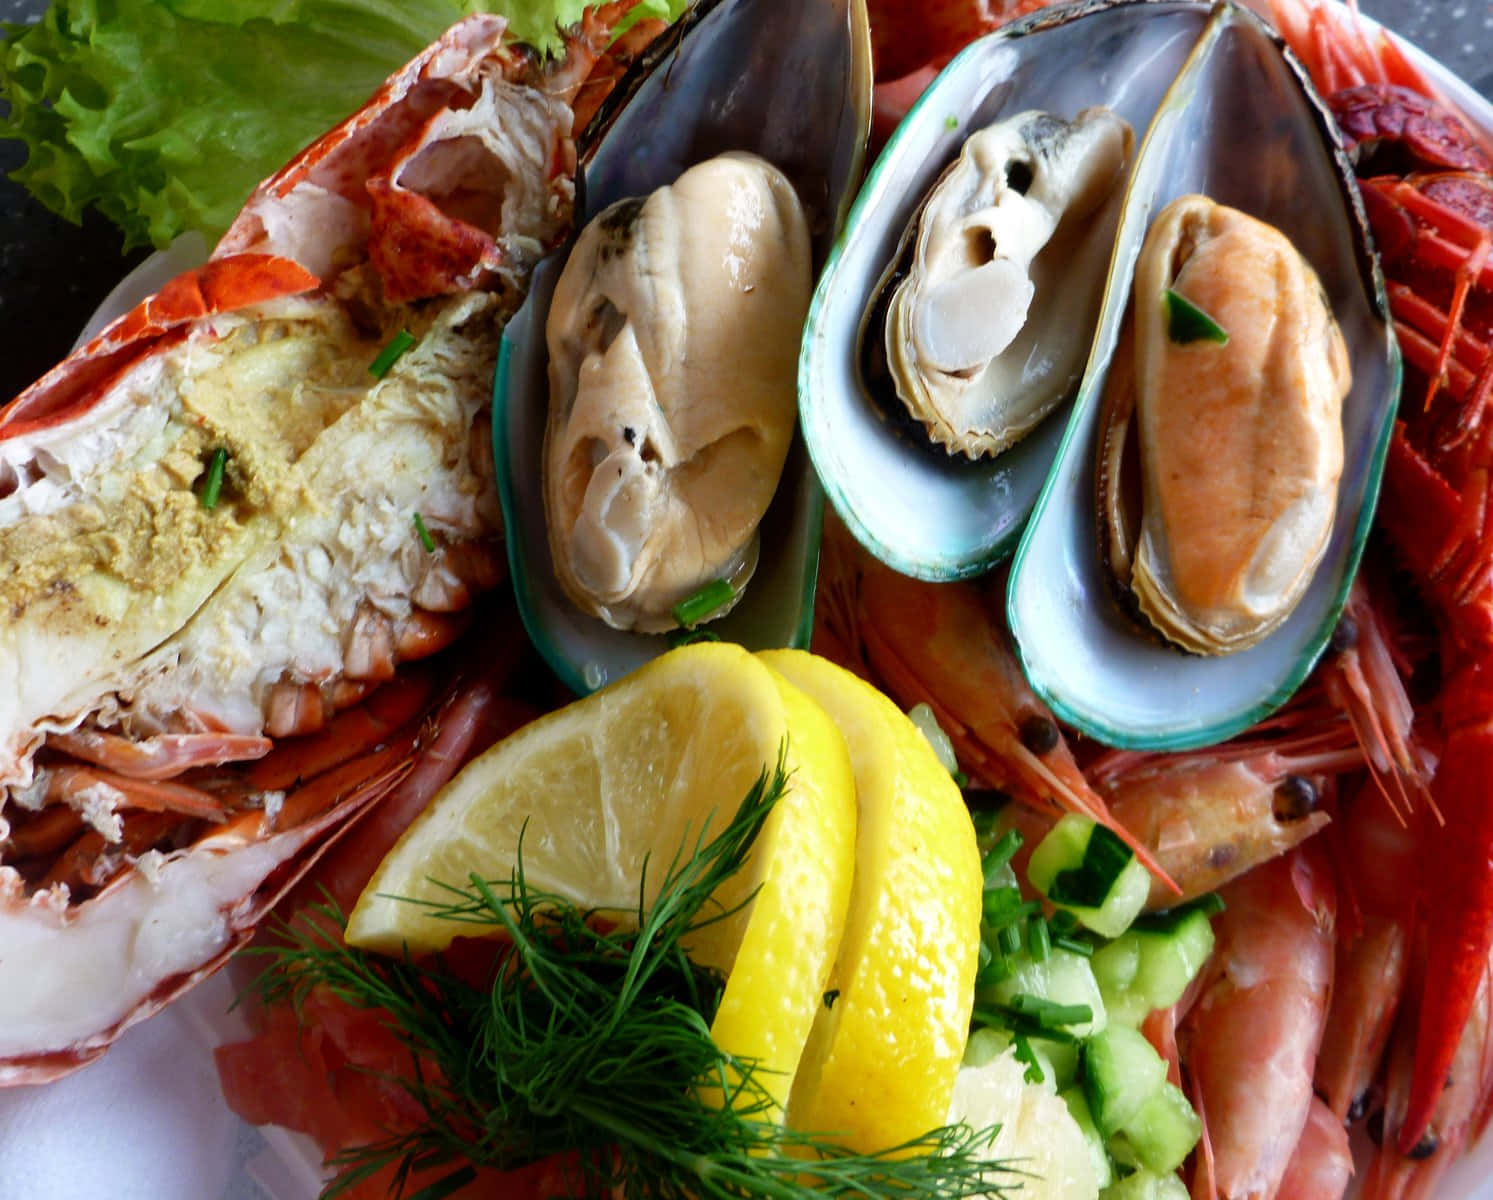 A delicious spread of fresh seafood.